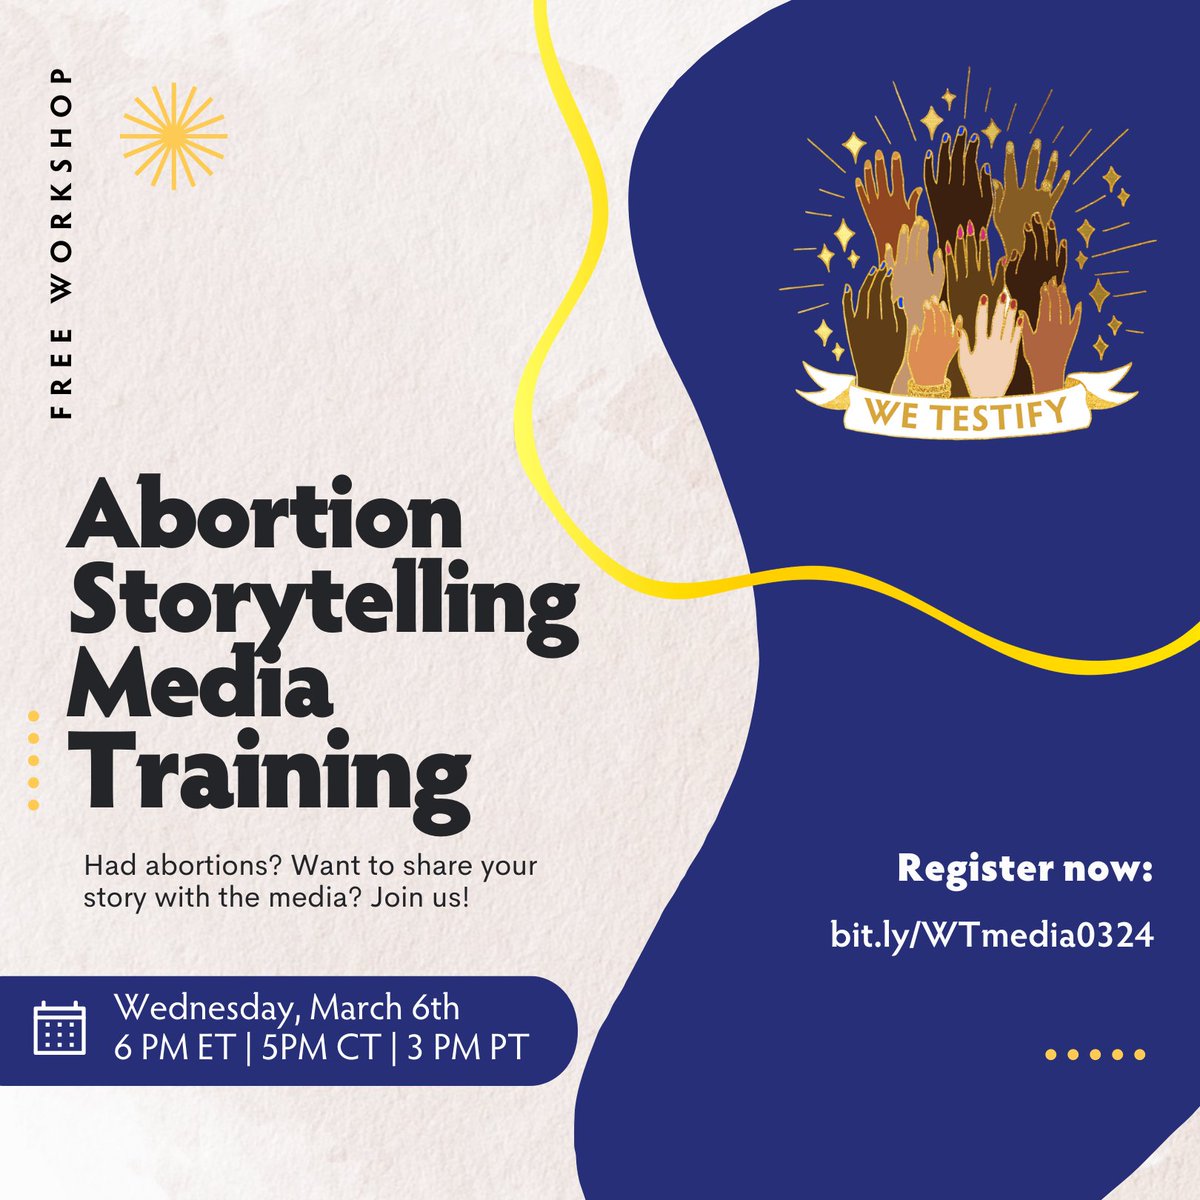 We Testify is hosting a virtual media training session on March 6th for people who have had abortions! If you're eager to share your experience with the media or simply interested in honing your storytelling skills, you can register at bit.ly/WTmedia0324